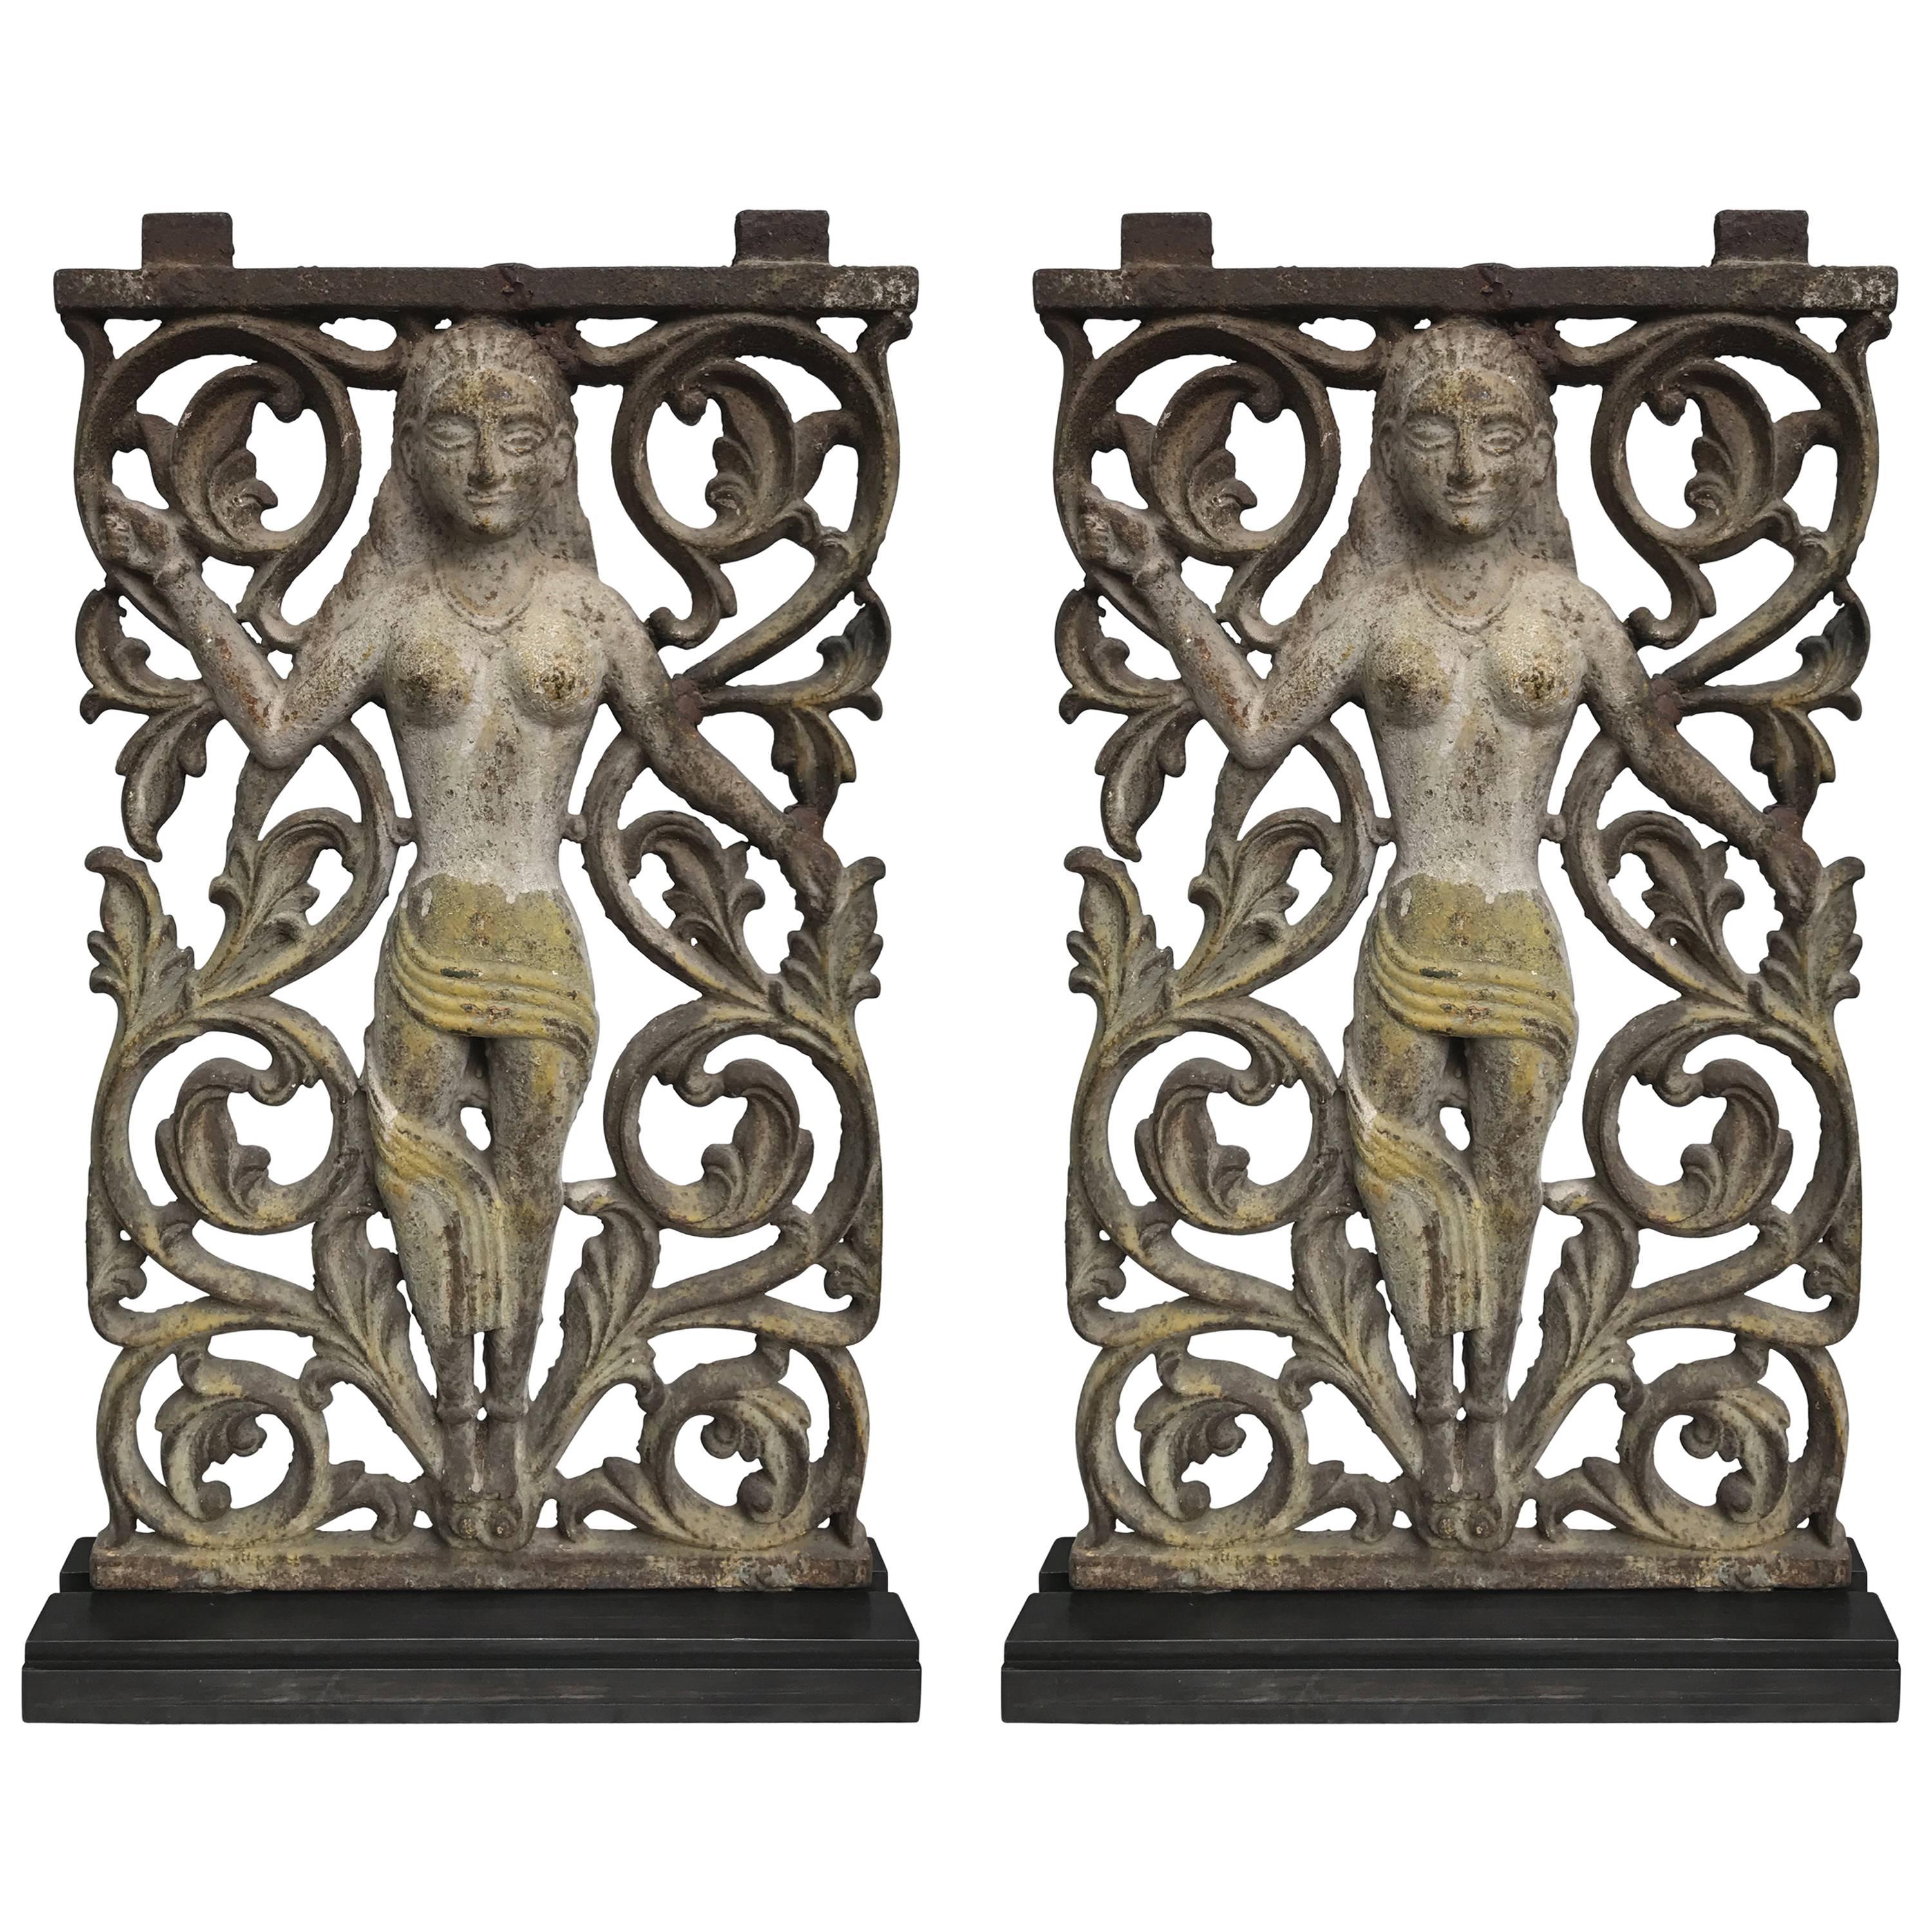 Pair of Anglo-Indian Cast Iron Architectural Panels